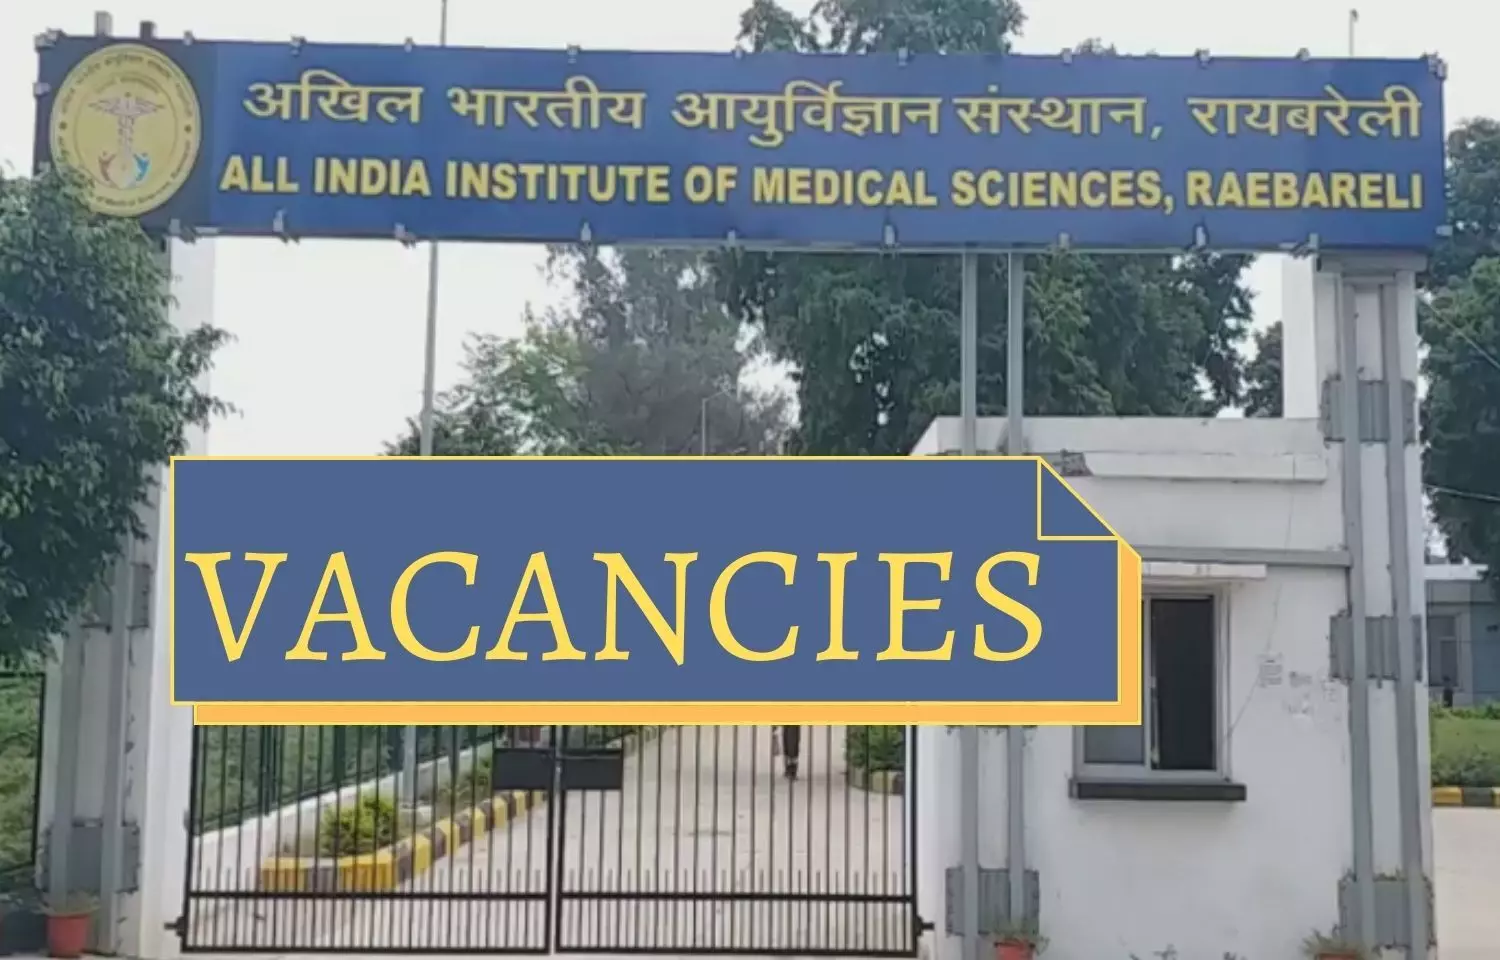 Walk In Interview For Senior Resident Post At AIIMS Raebareli: View All Details Here